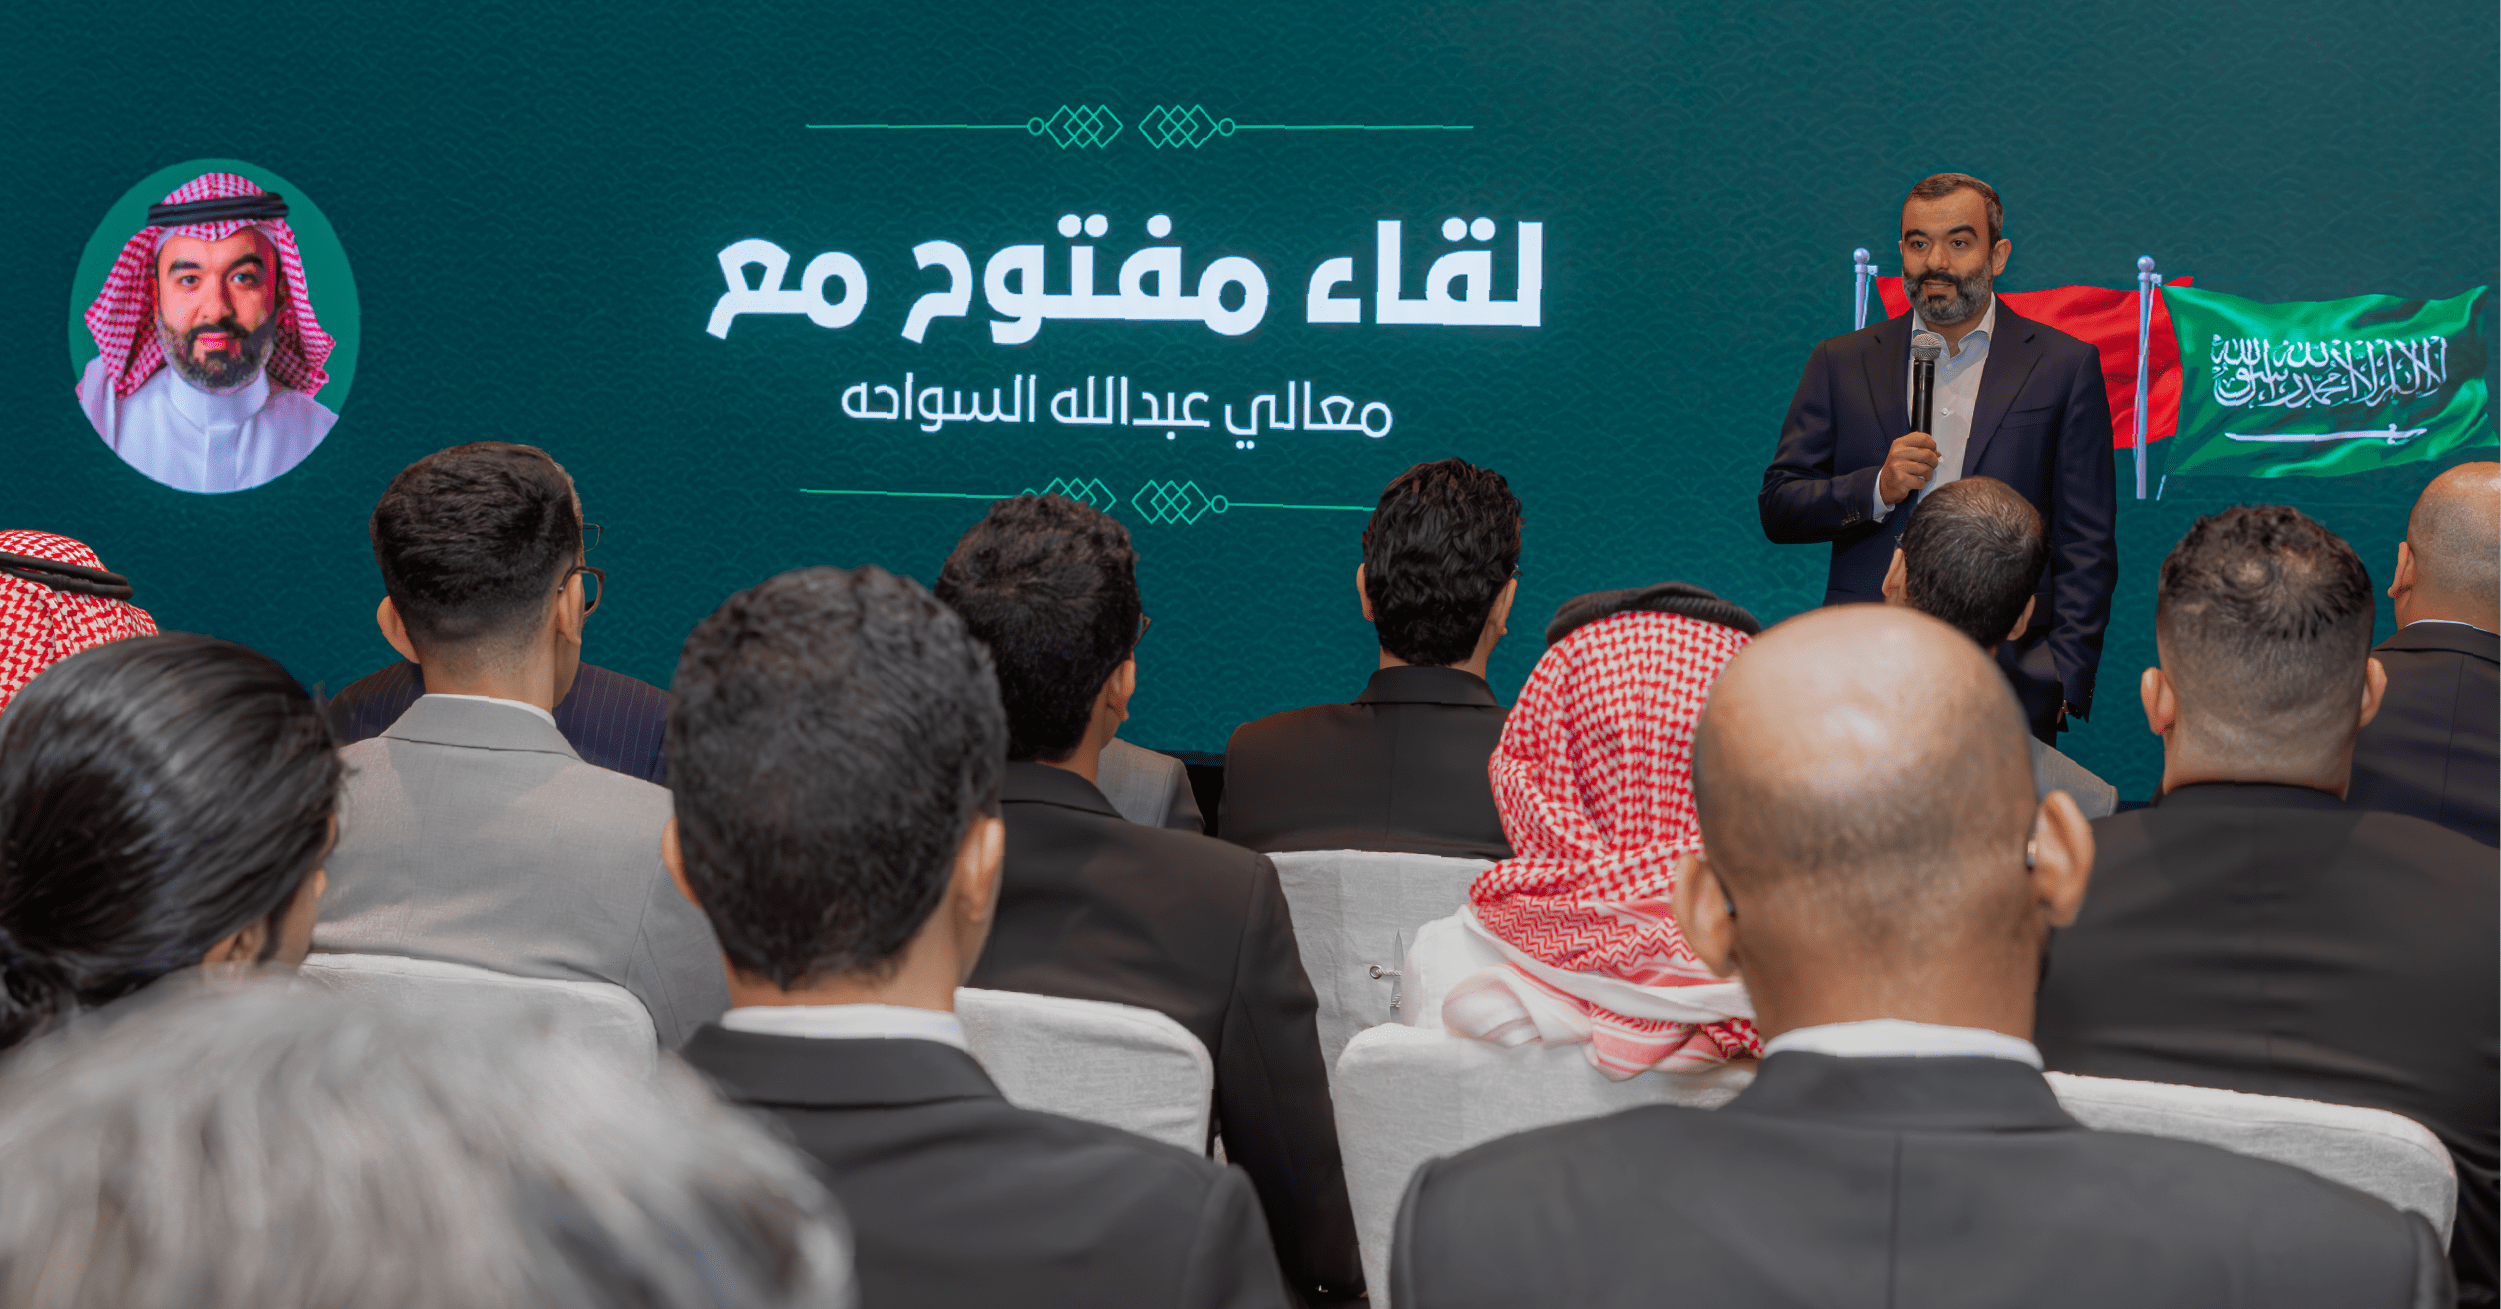 Communications and Information Technology Minister Meets with Saudi Students in China